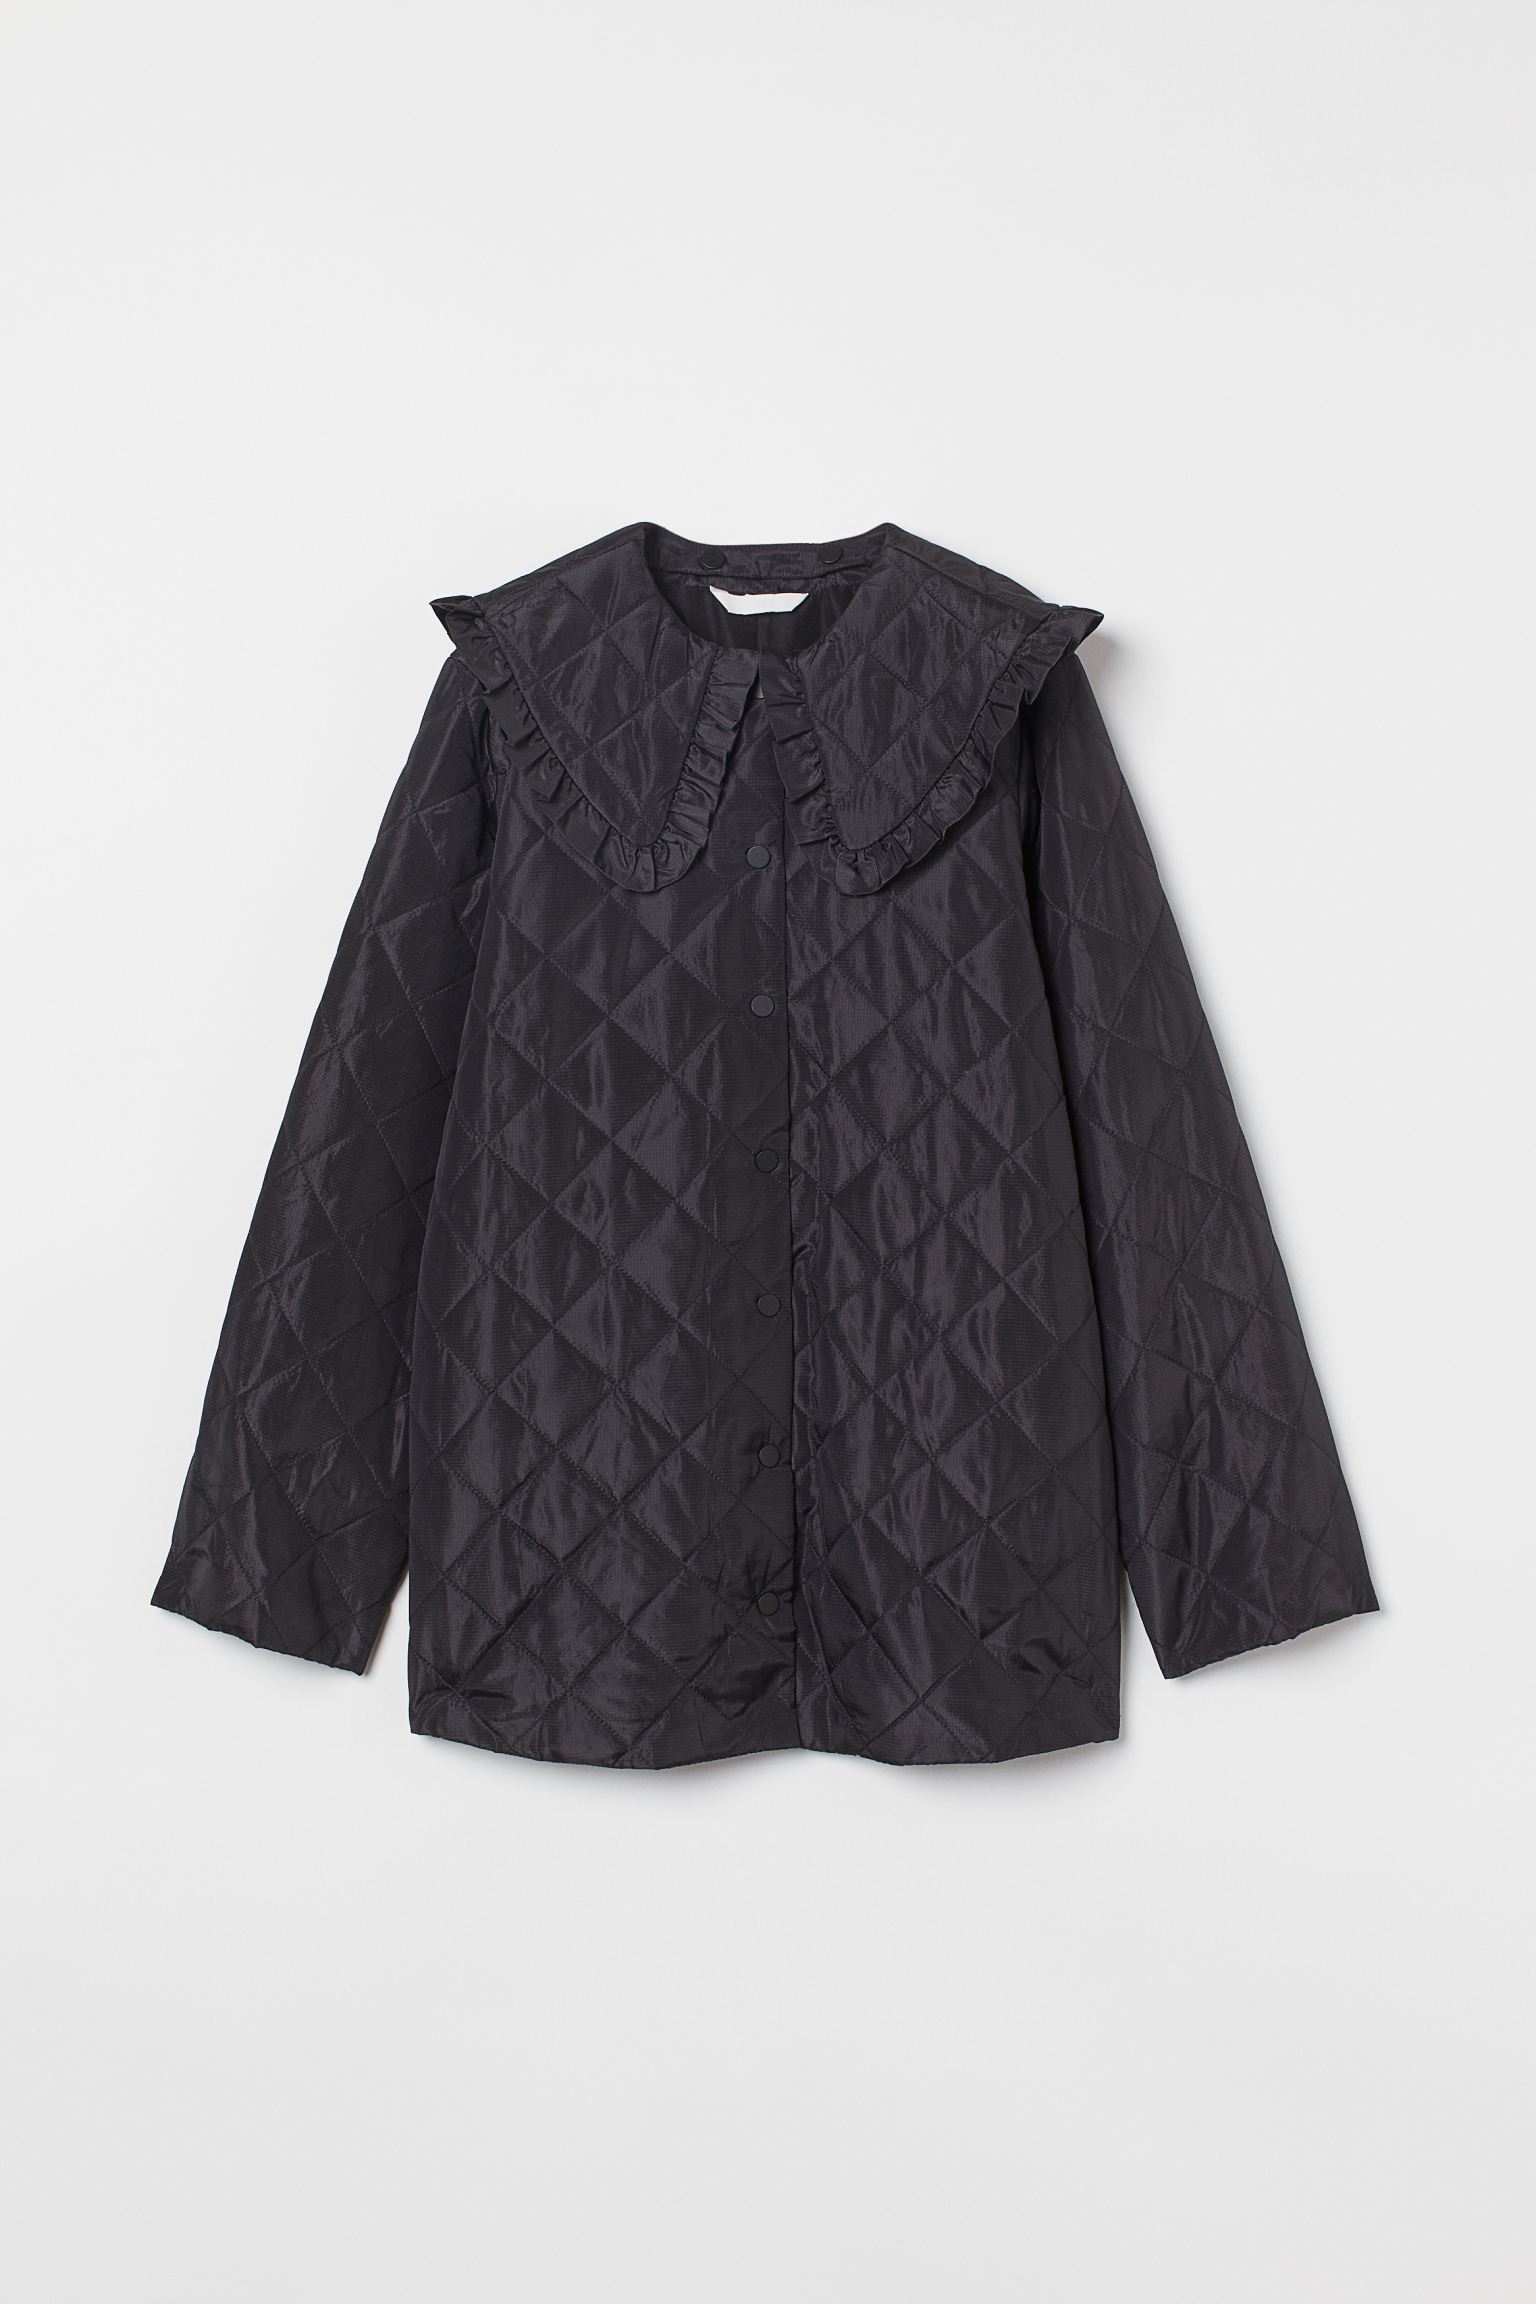 H&M Quilted Shirt jacket